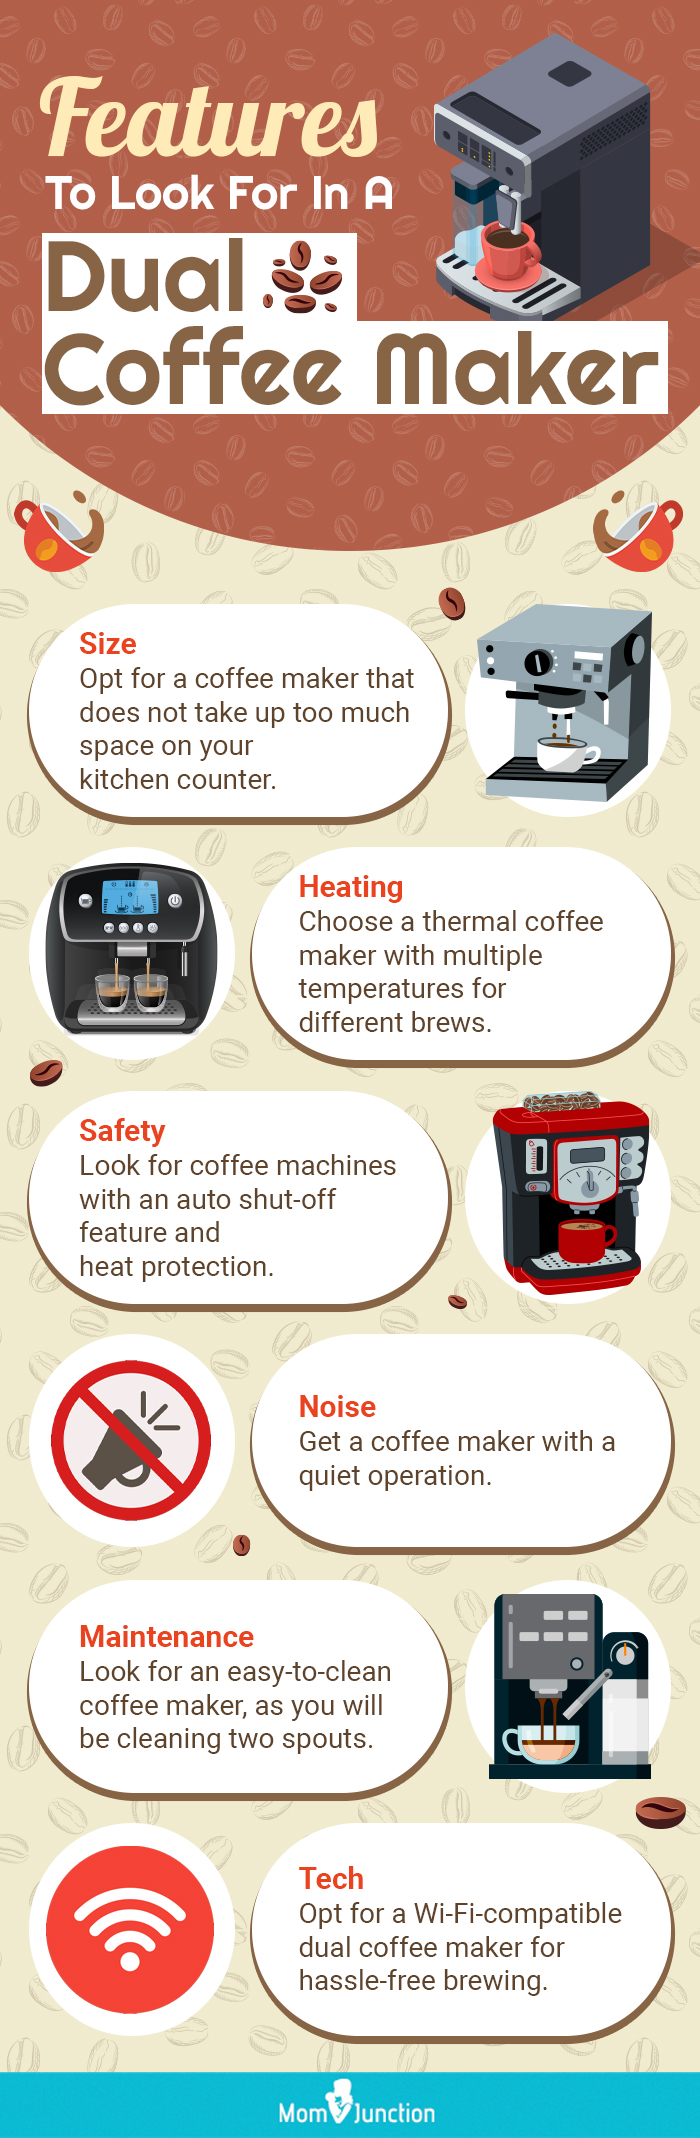 Features To Look For In A Dual Coffee Maker